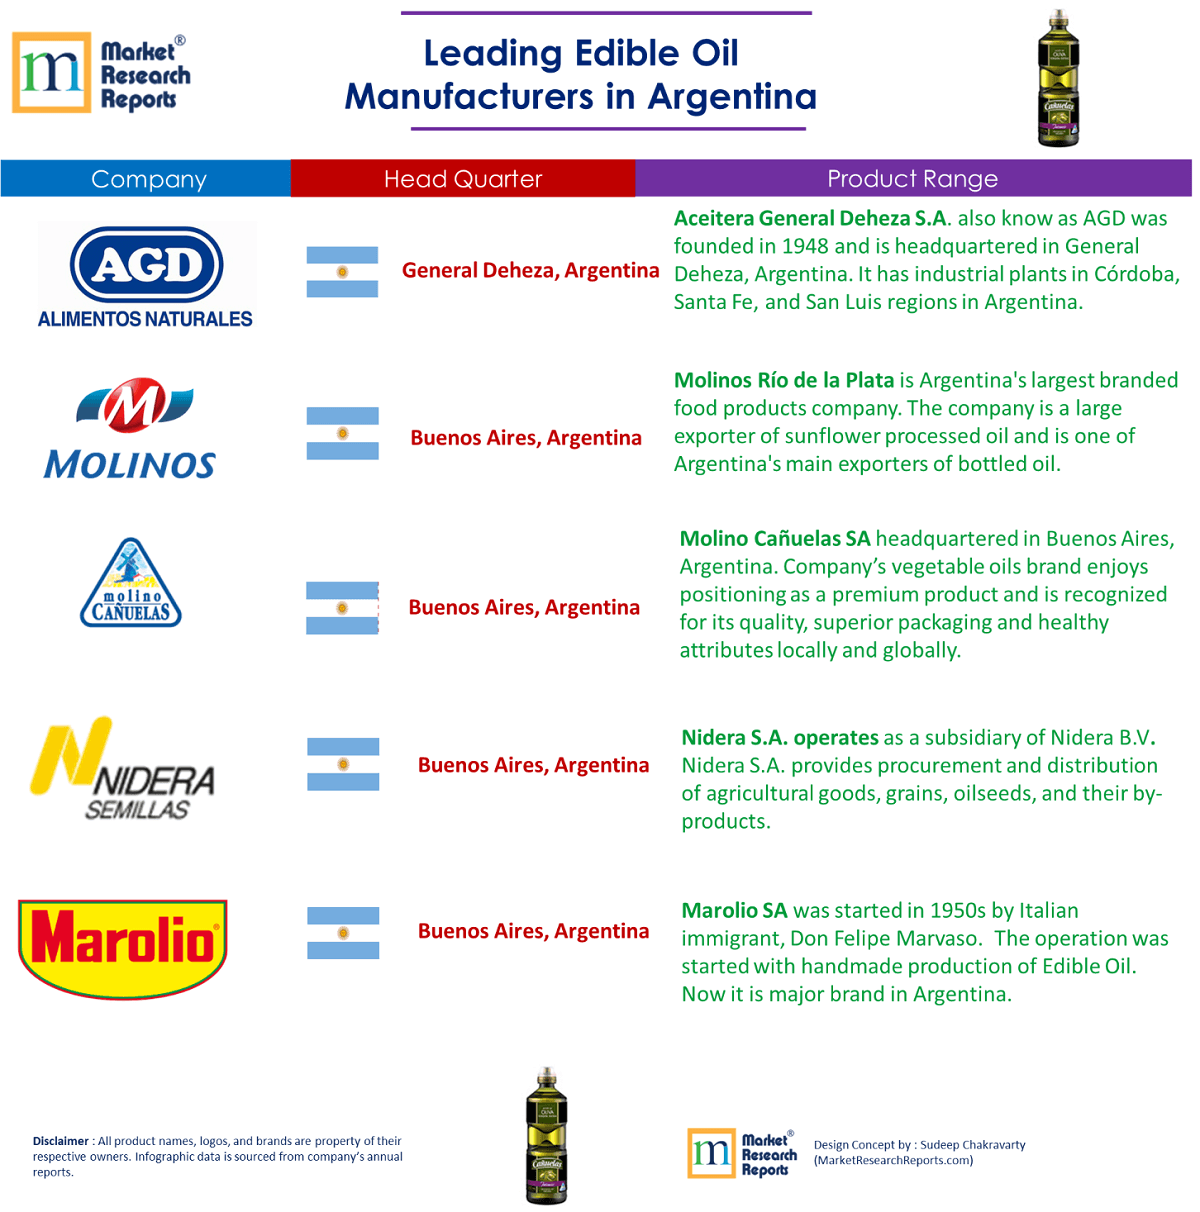 Leading Edible Oil Manufacturers in Argentina